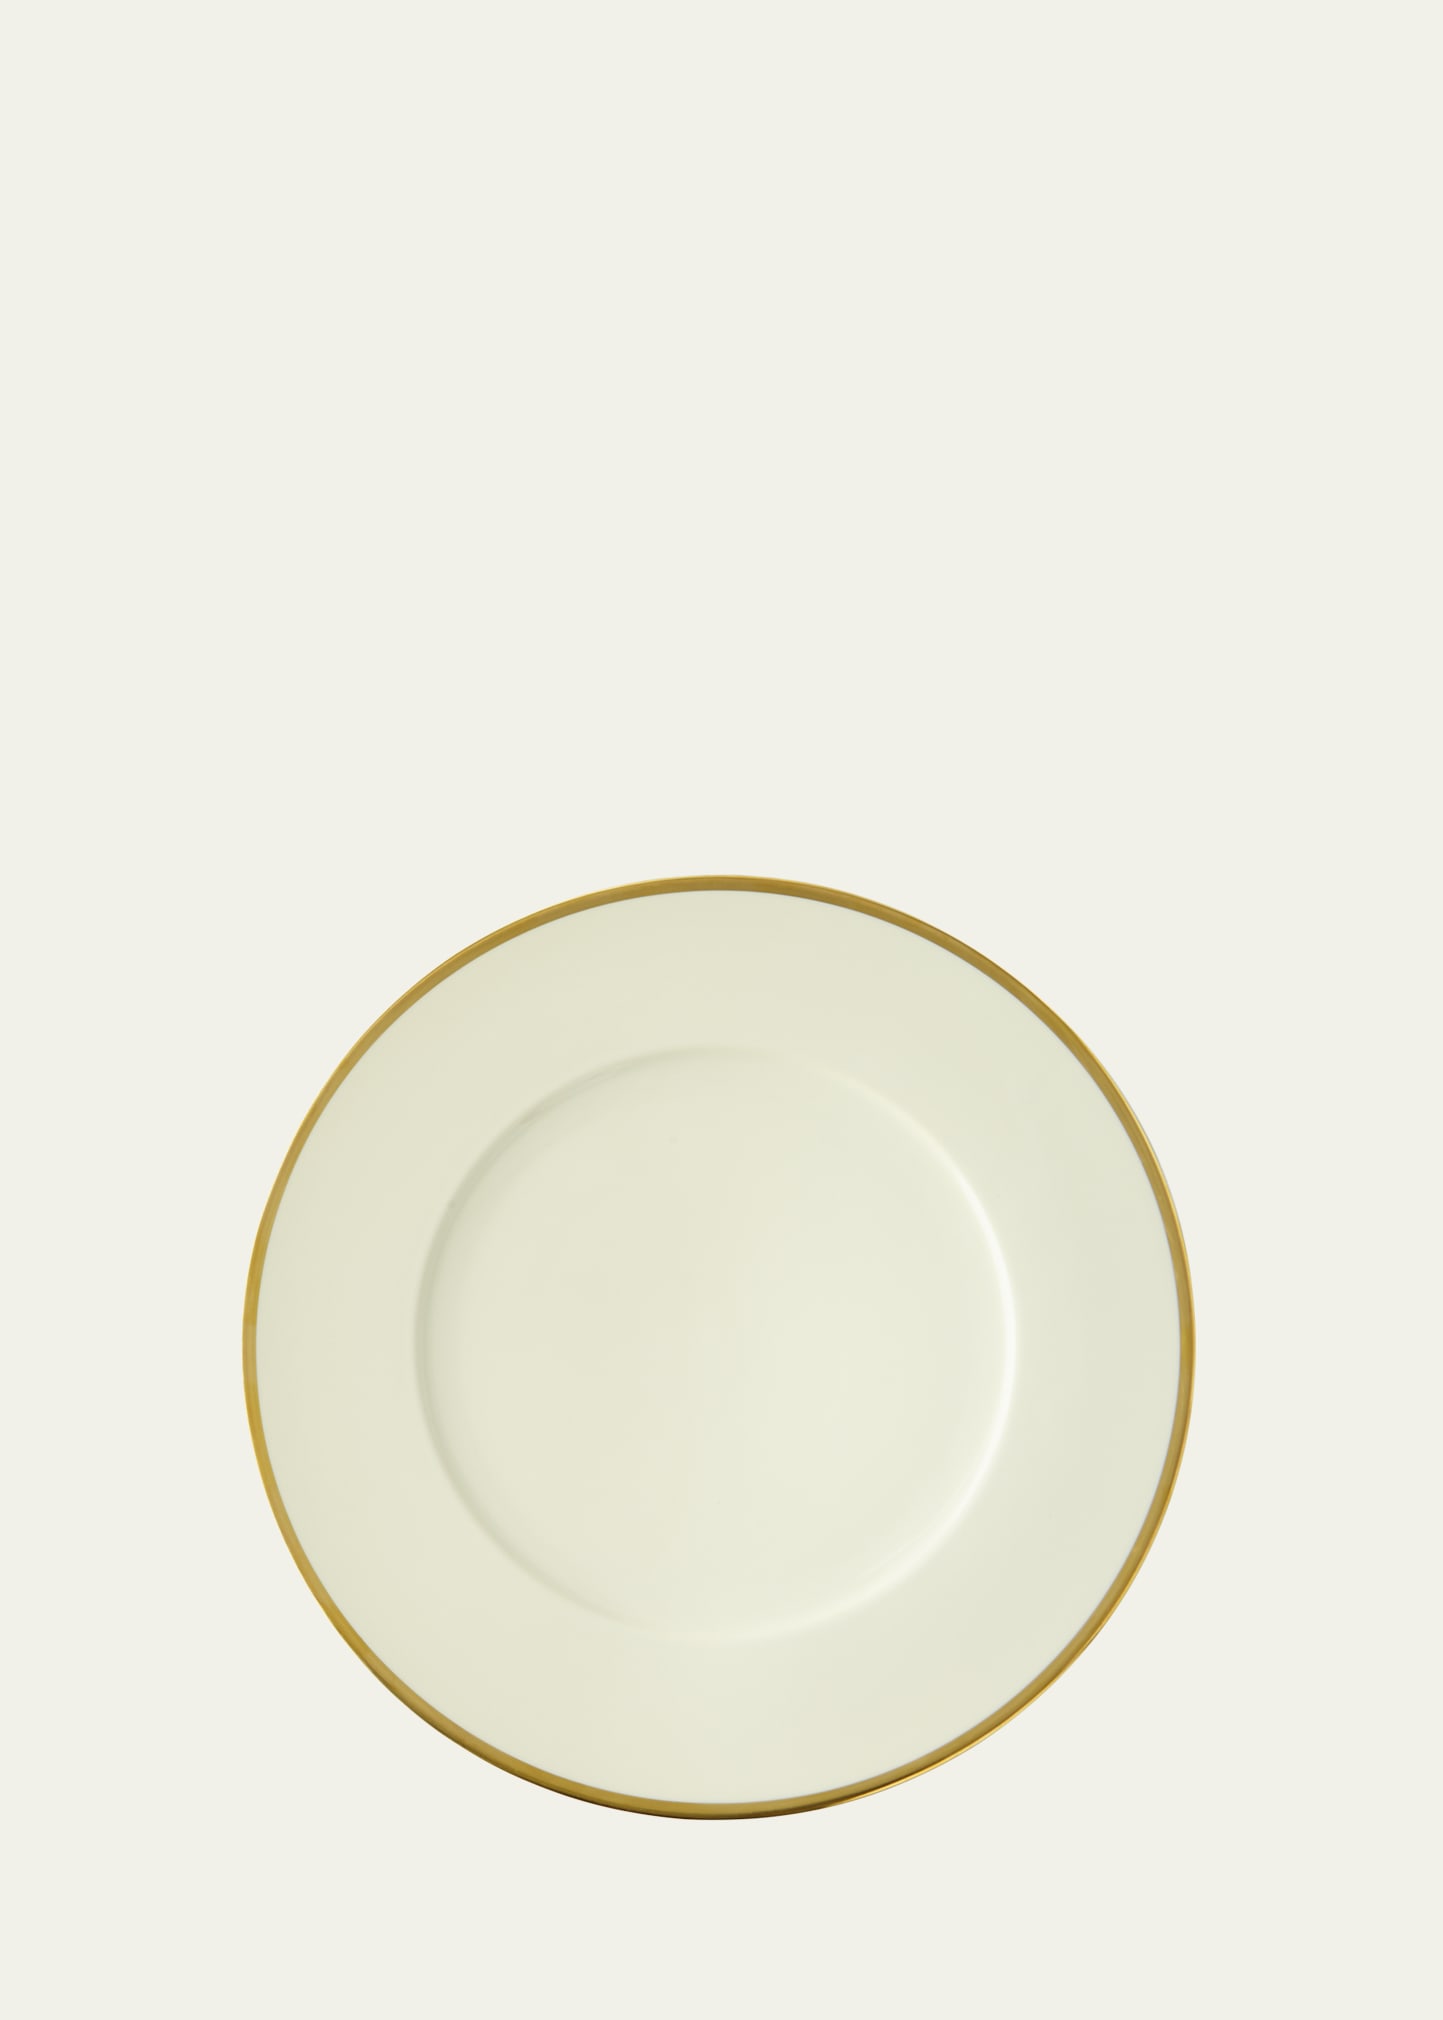 Anna Weatherley Porcelain and 24k Gold Charger